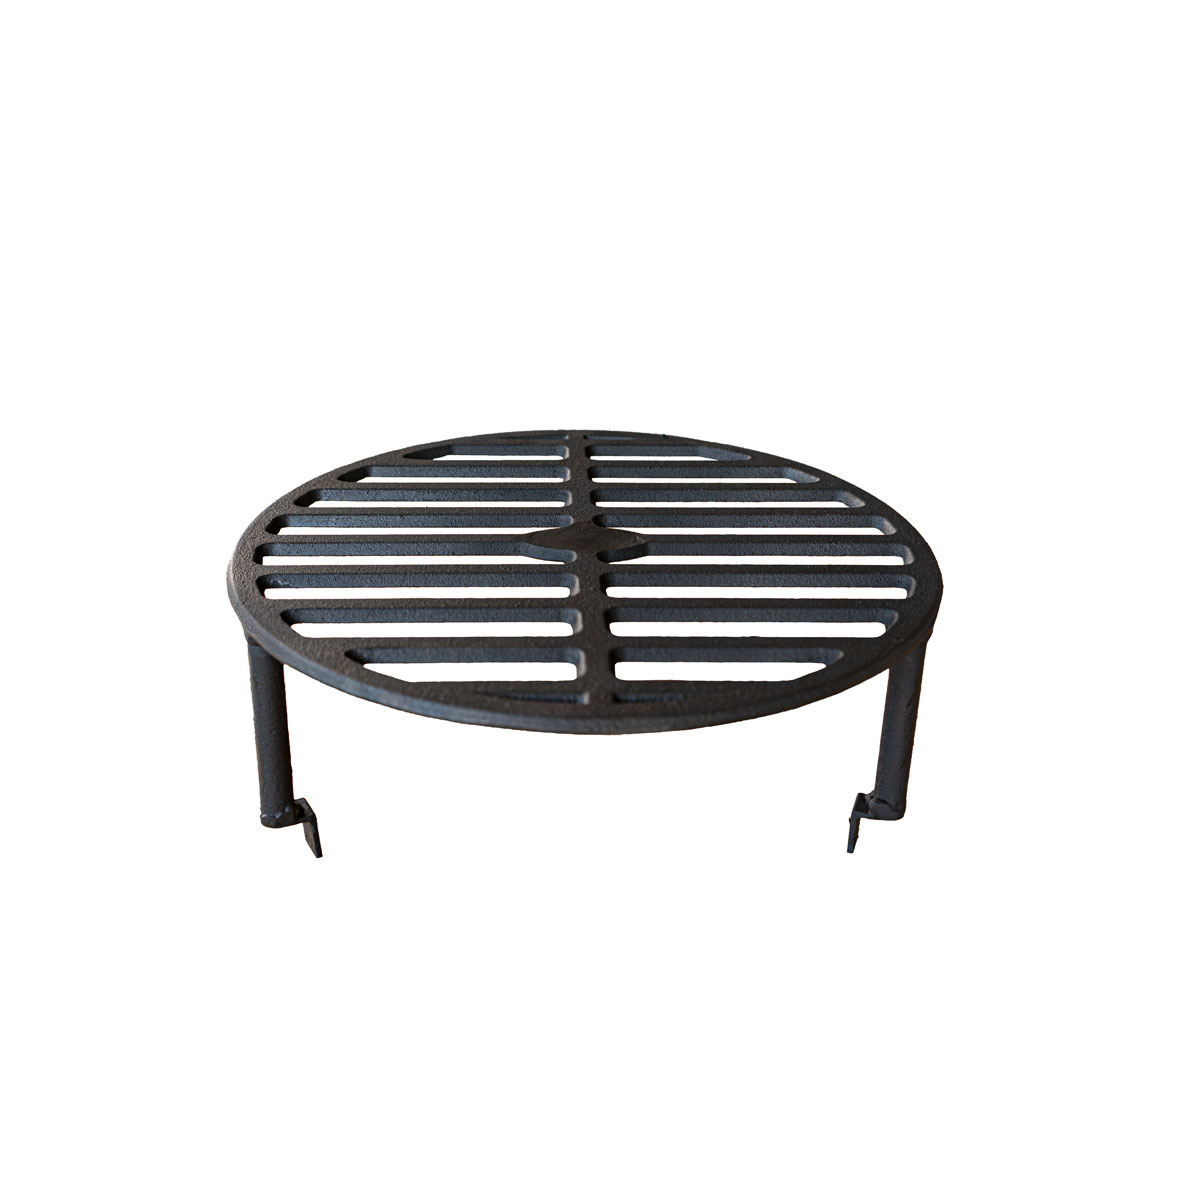 https://polyflam.fr/wp-content/uploads/2020/08/accessoire-grille-surelevee-barbecue-mini-70.jpg